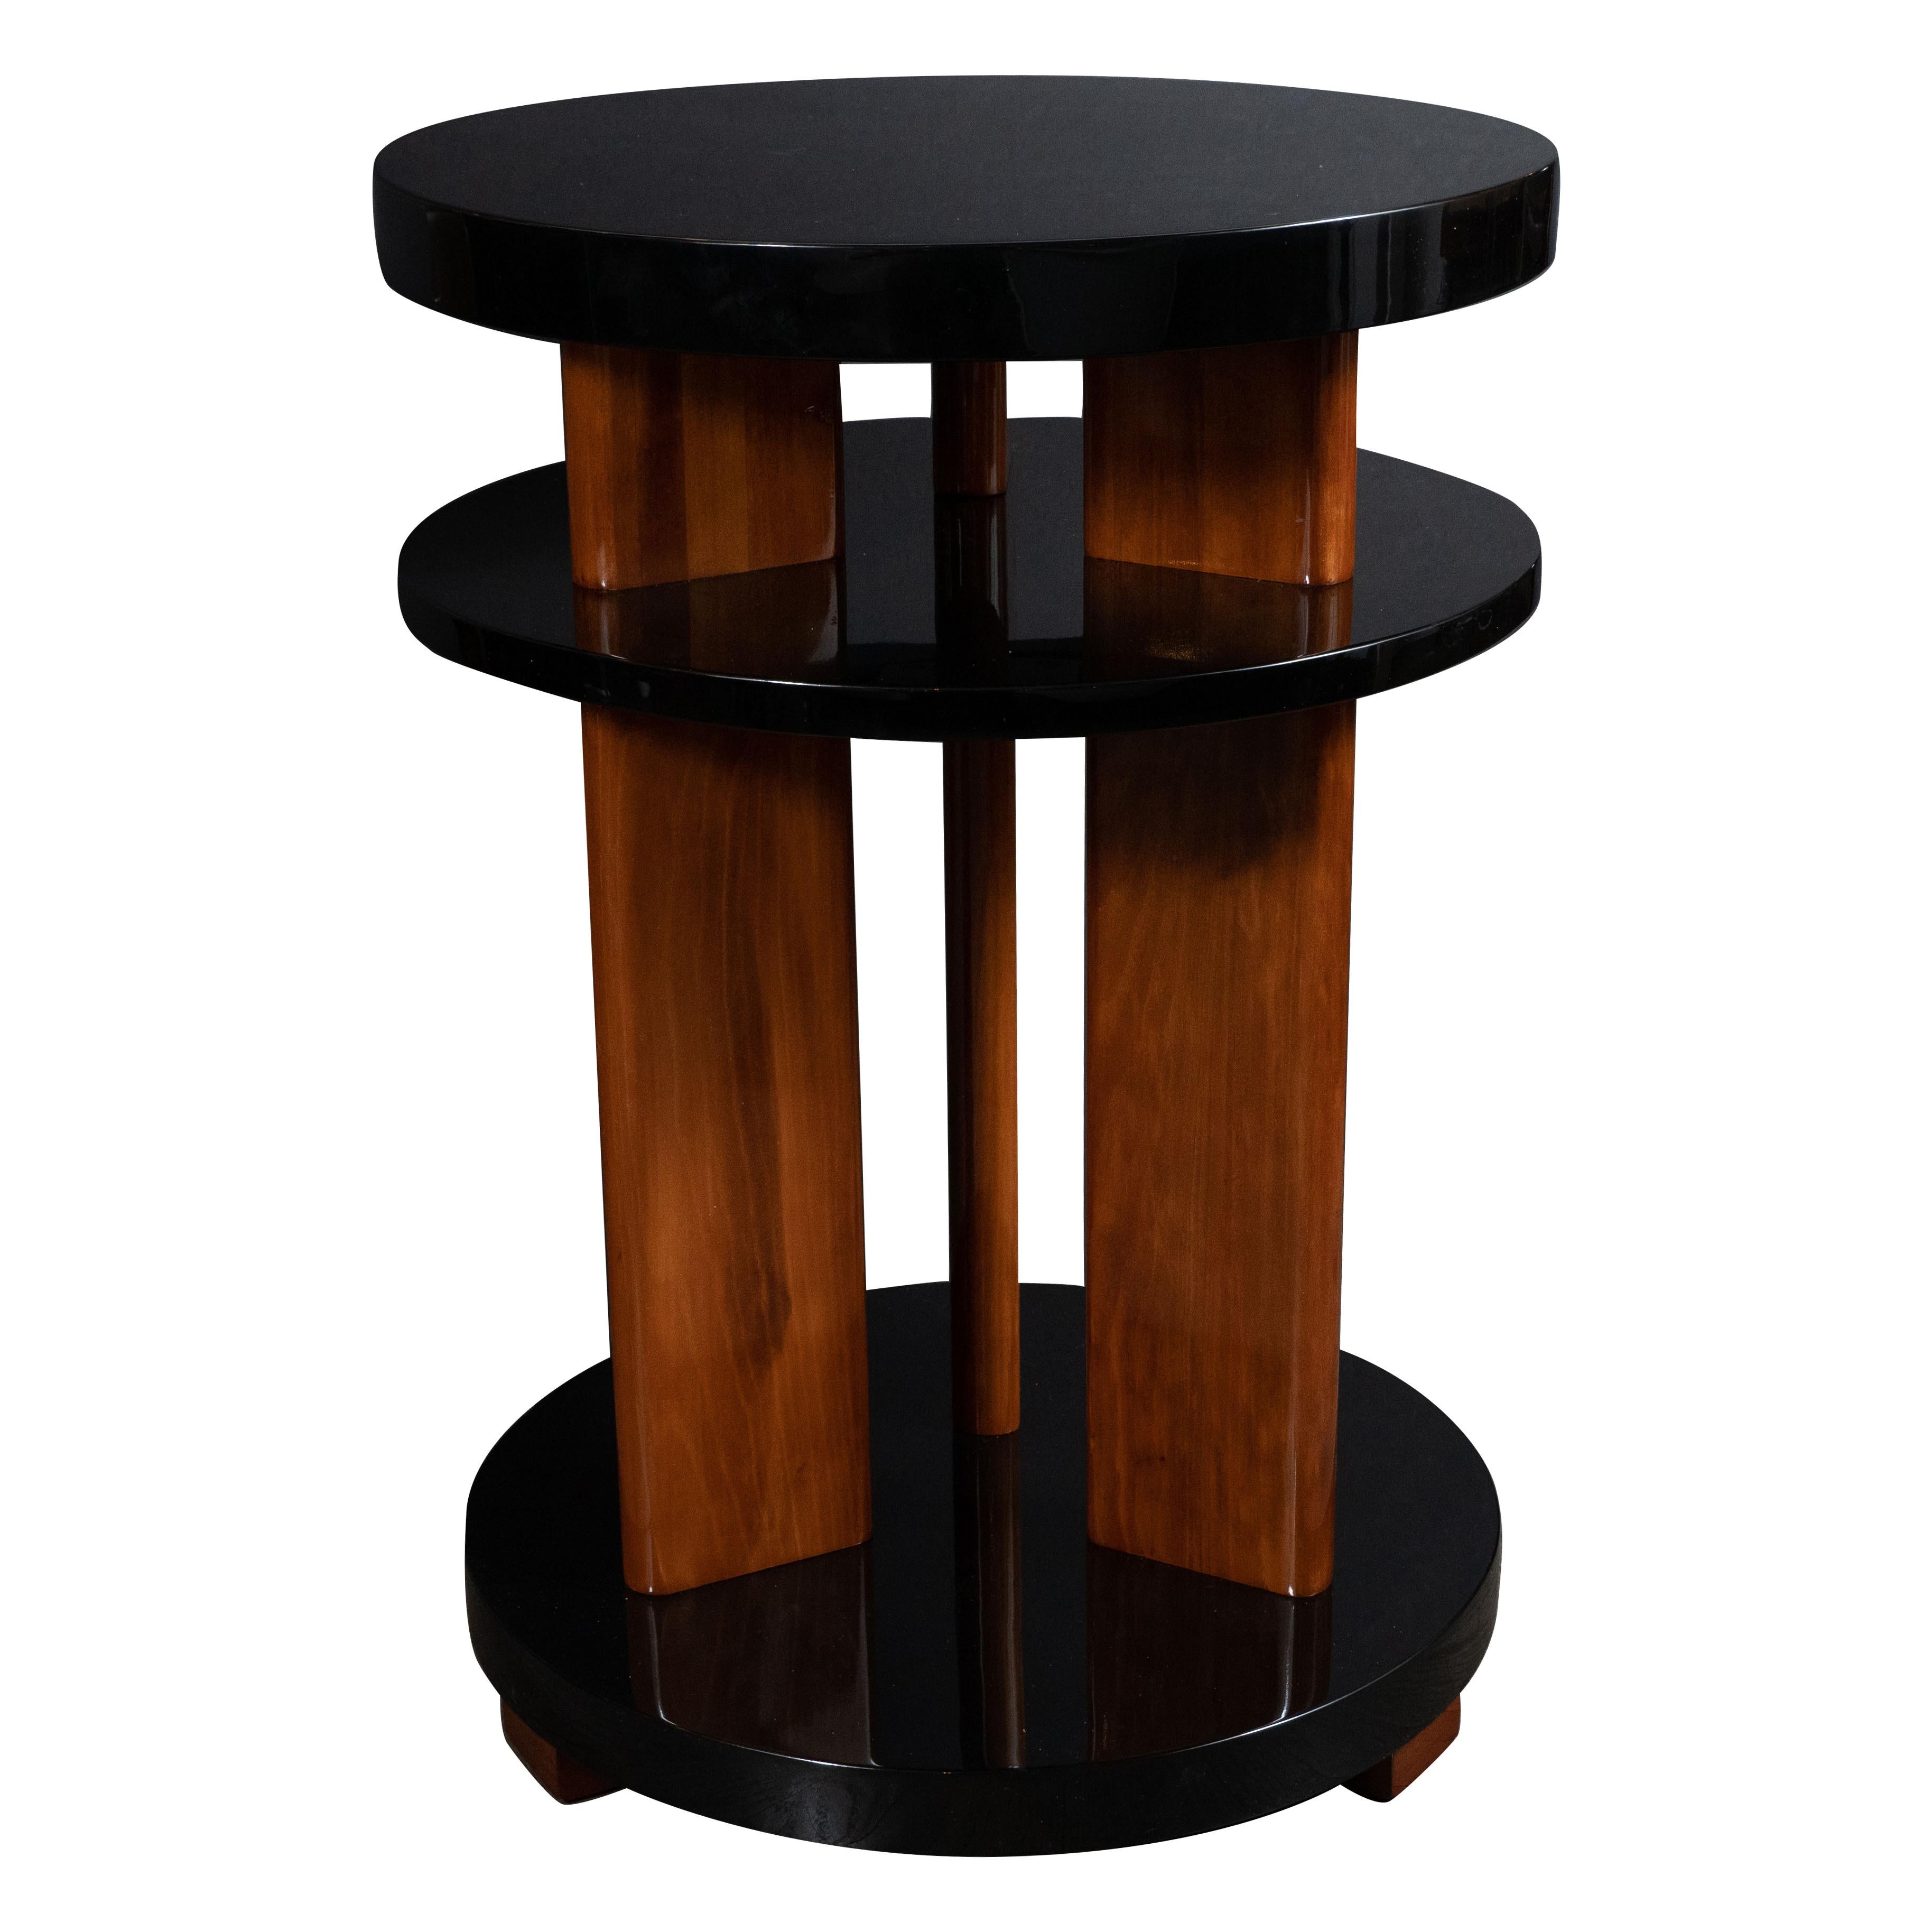 This stunning pair of Art Deco Machine Age side or occasional tables were realized in the United States, circa 1935. They feature three circular tiers in black lacquer resting on rectangular walnut feet. The table is supported by three streamlined